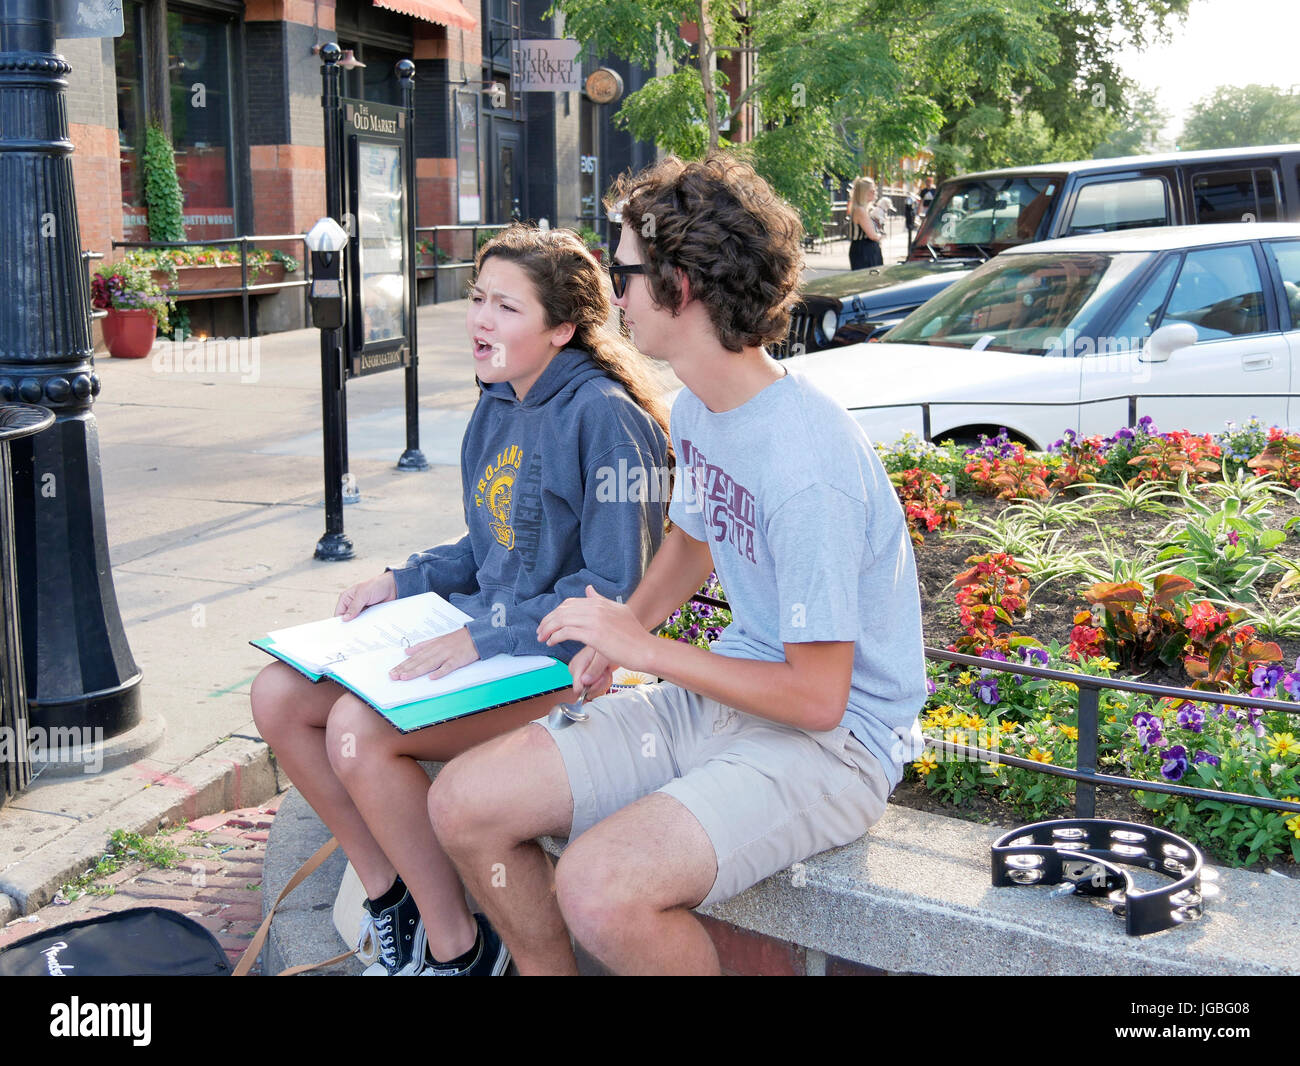 Young woman singing while young man plays the spoons. Old Market District, Omaha, Nebraska. Stock Photo